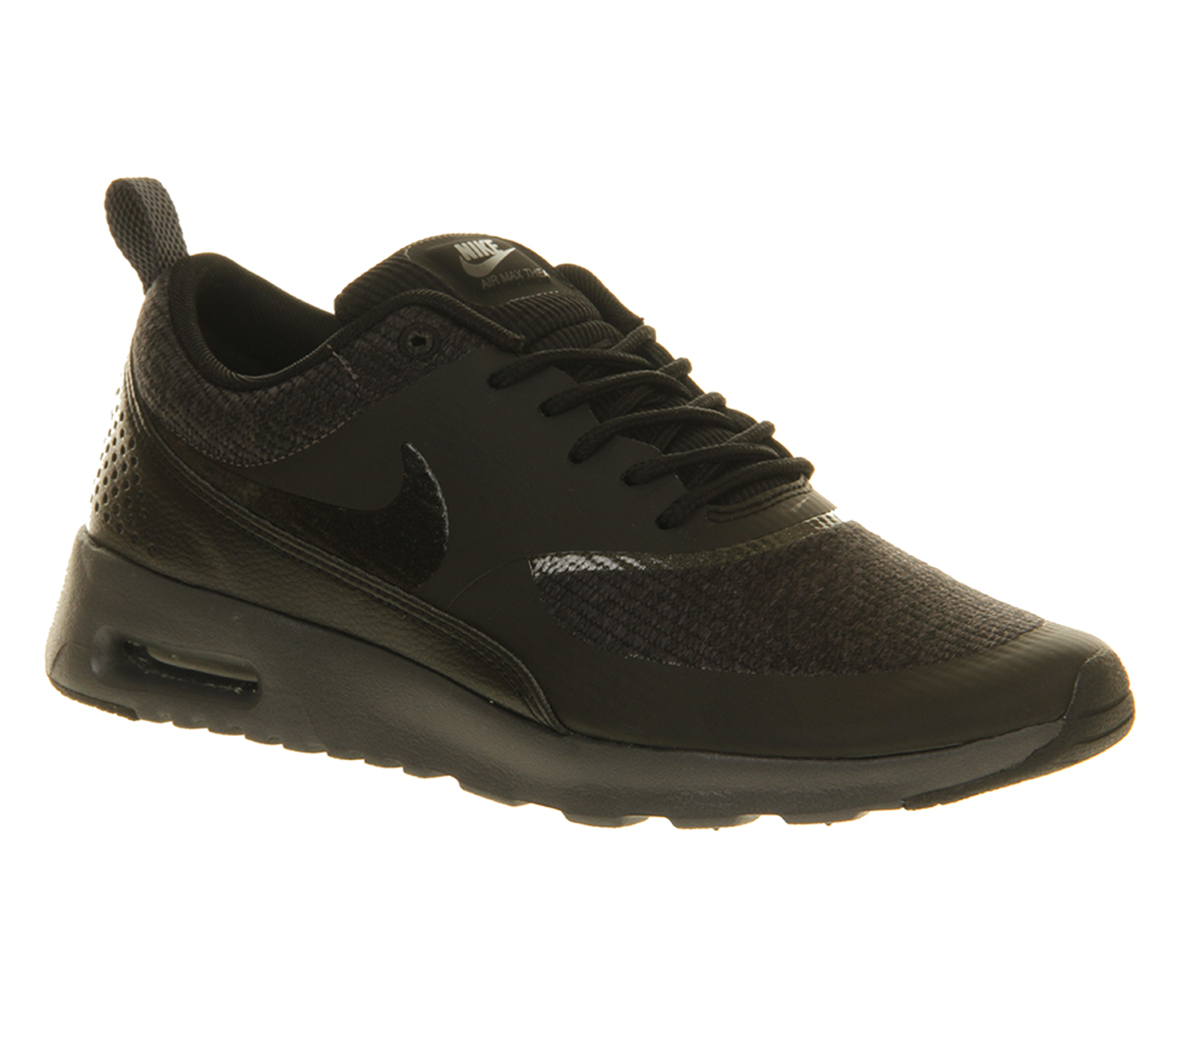 Nike Air Max Thea Black Antharacite - Office Girl